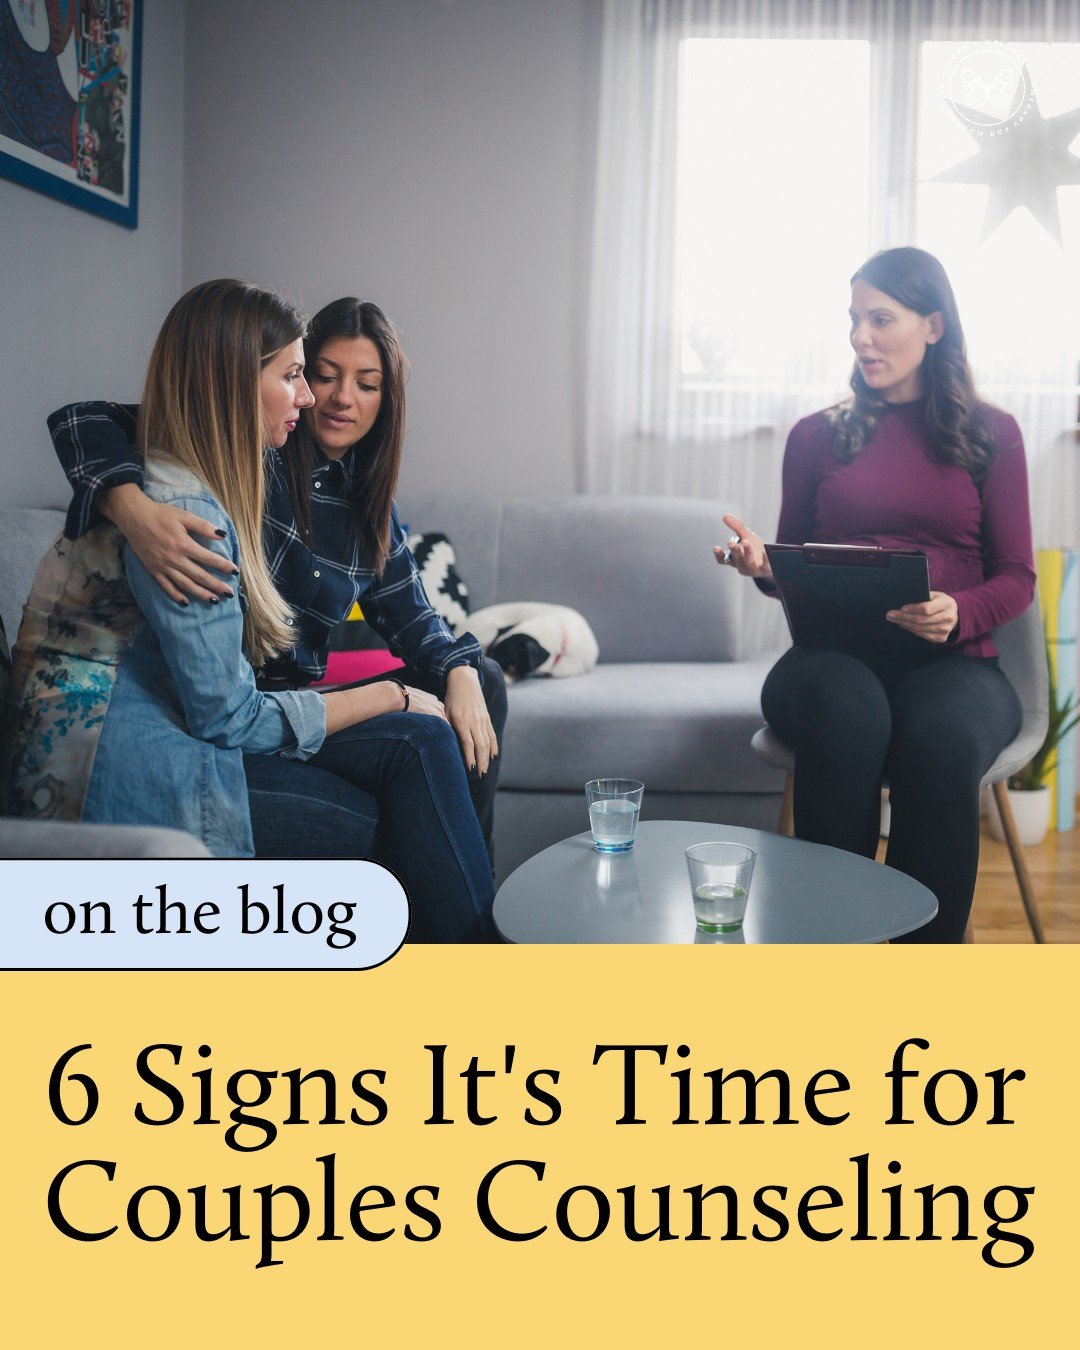 There&rsquo;s no perfect time to start couples counseling, but it&rsquo;s true that couples often wait for a very long time to get support after they start having problems. The negative patterns that lead to disconnection have more time to get ingrai